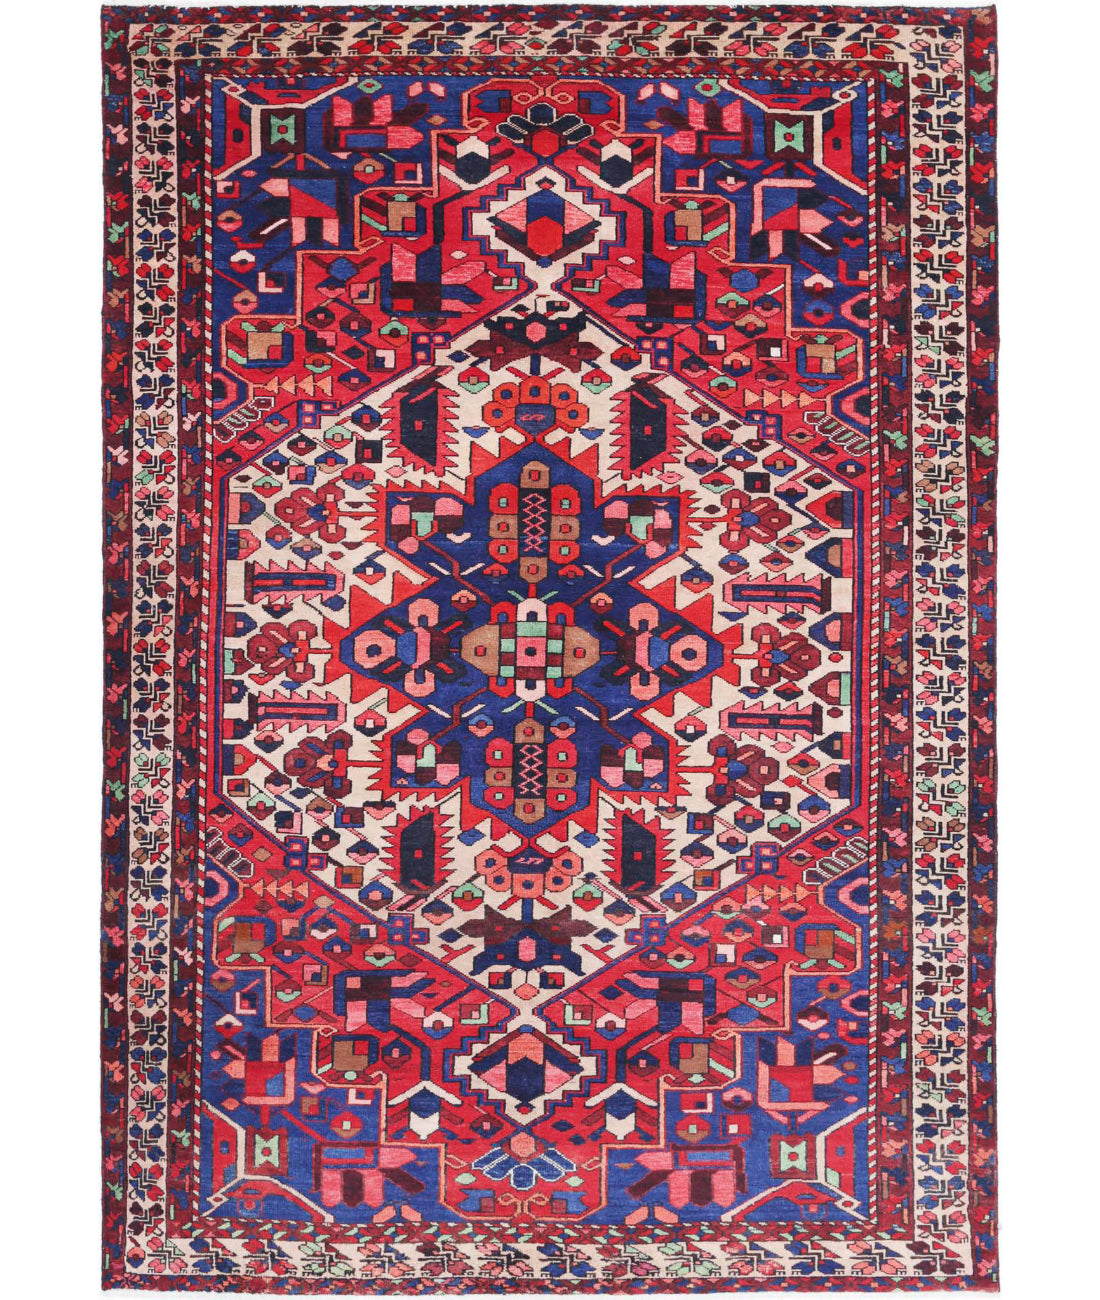 Hand Knotted Persian Bakhtiari Wool Rug - 6'7'' x 10'2'' 6'7'' x 10'2'' (198 X 305) / Red / Ivory